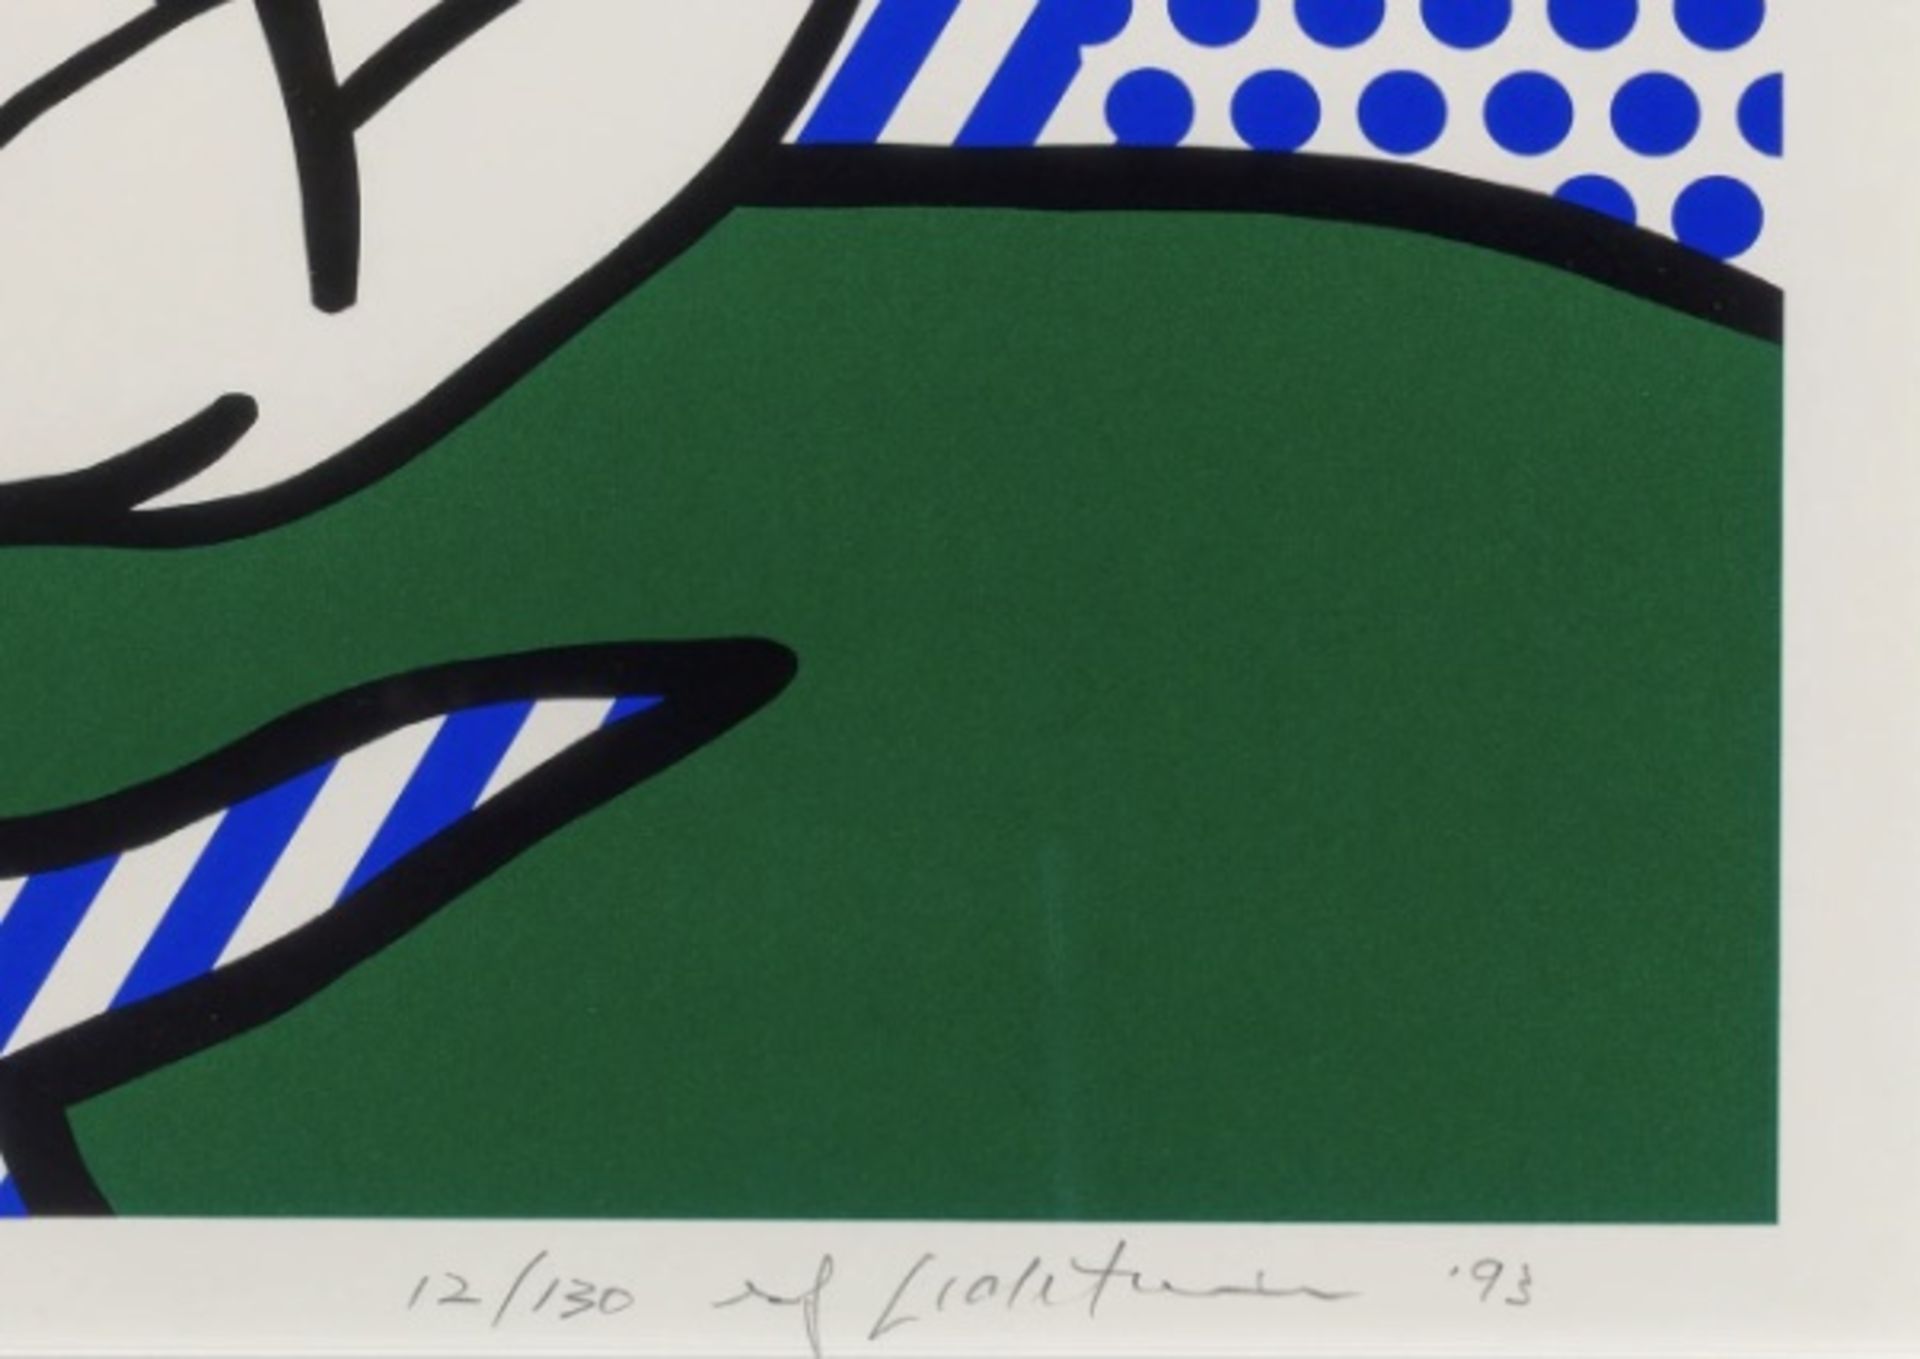 Roy Lichtenstein "Water Lily, 1993" Plate Signed Offset Lithograph - Image 2 of 5